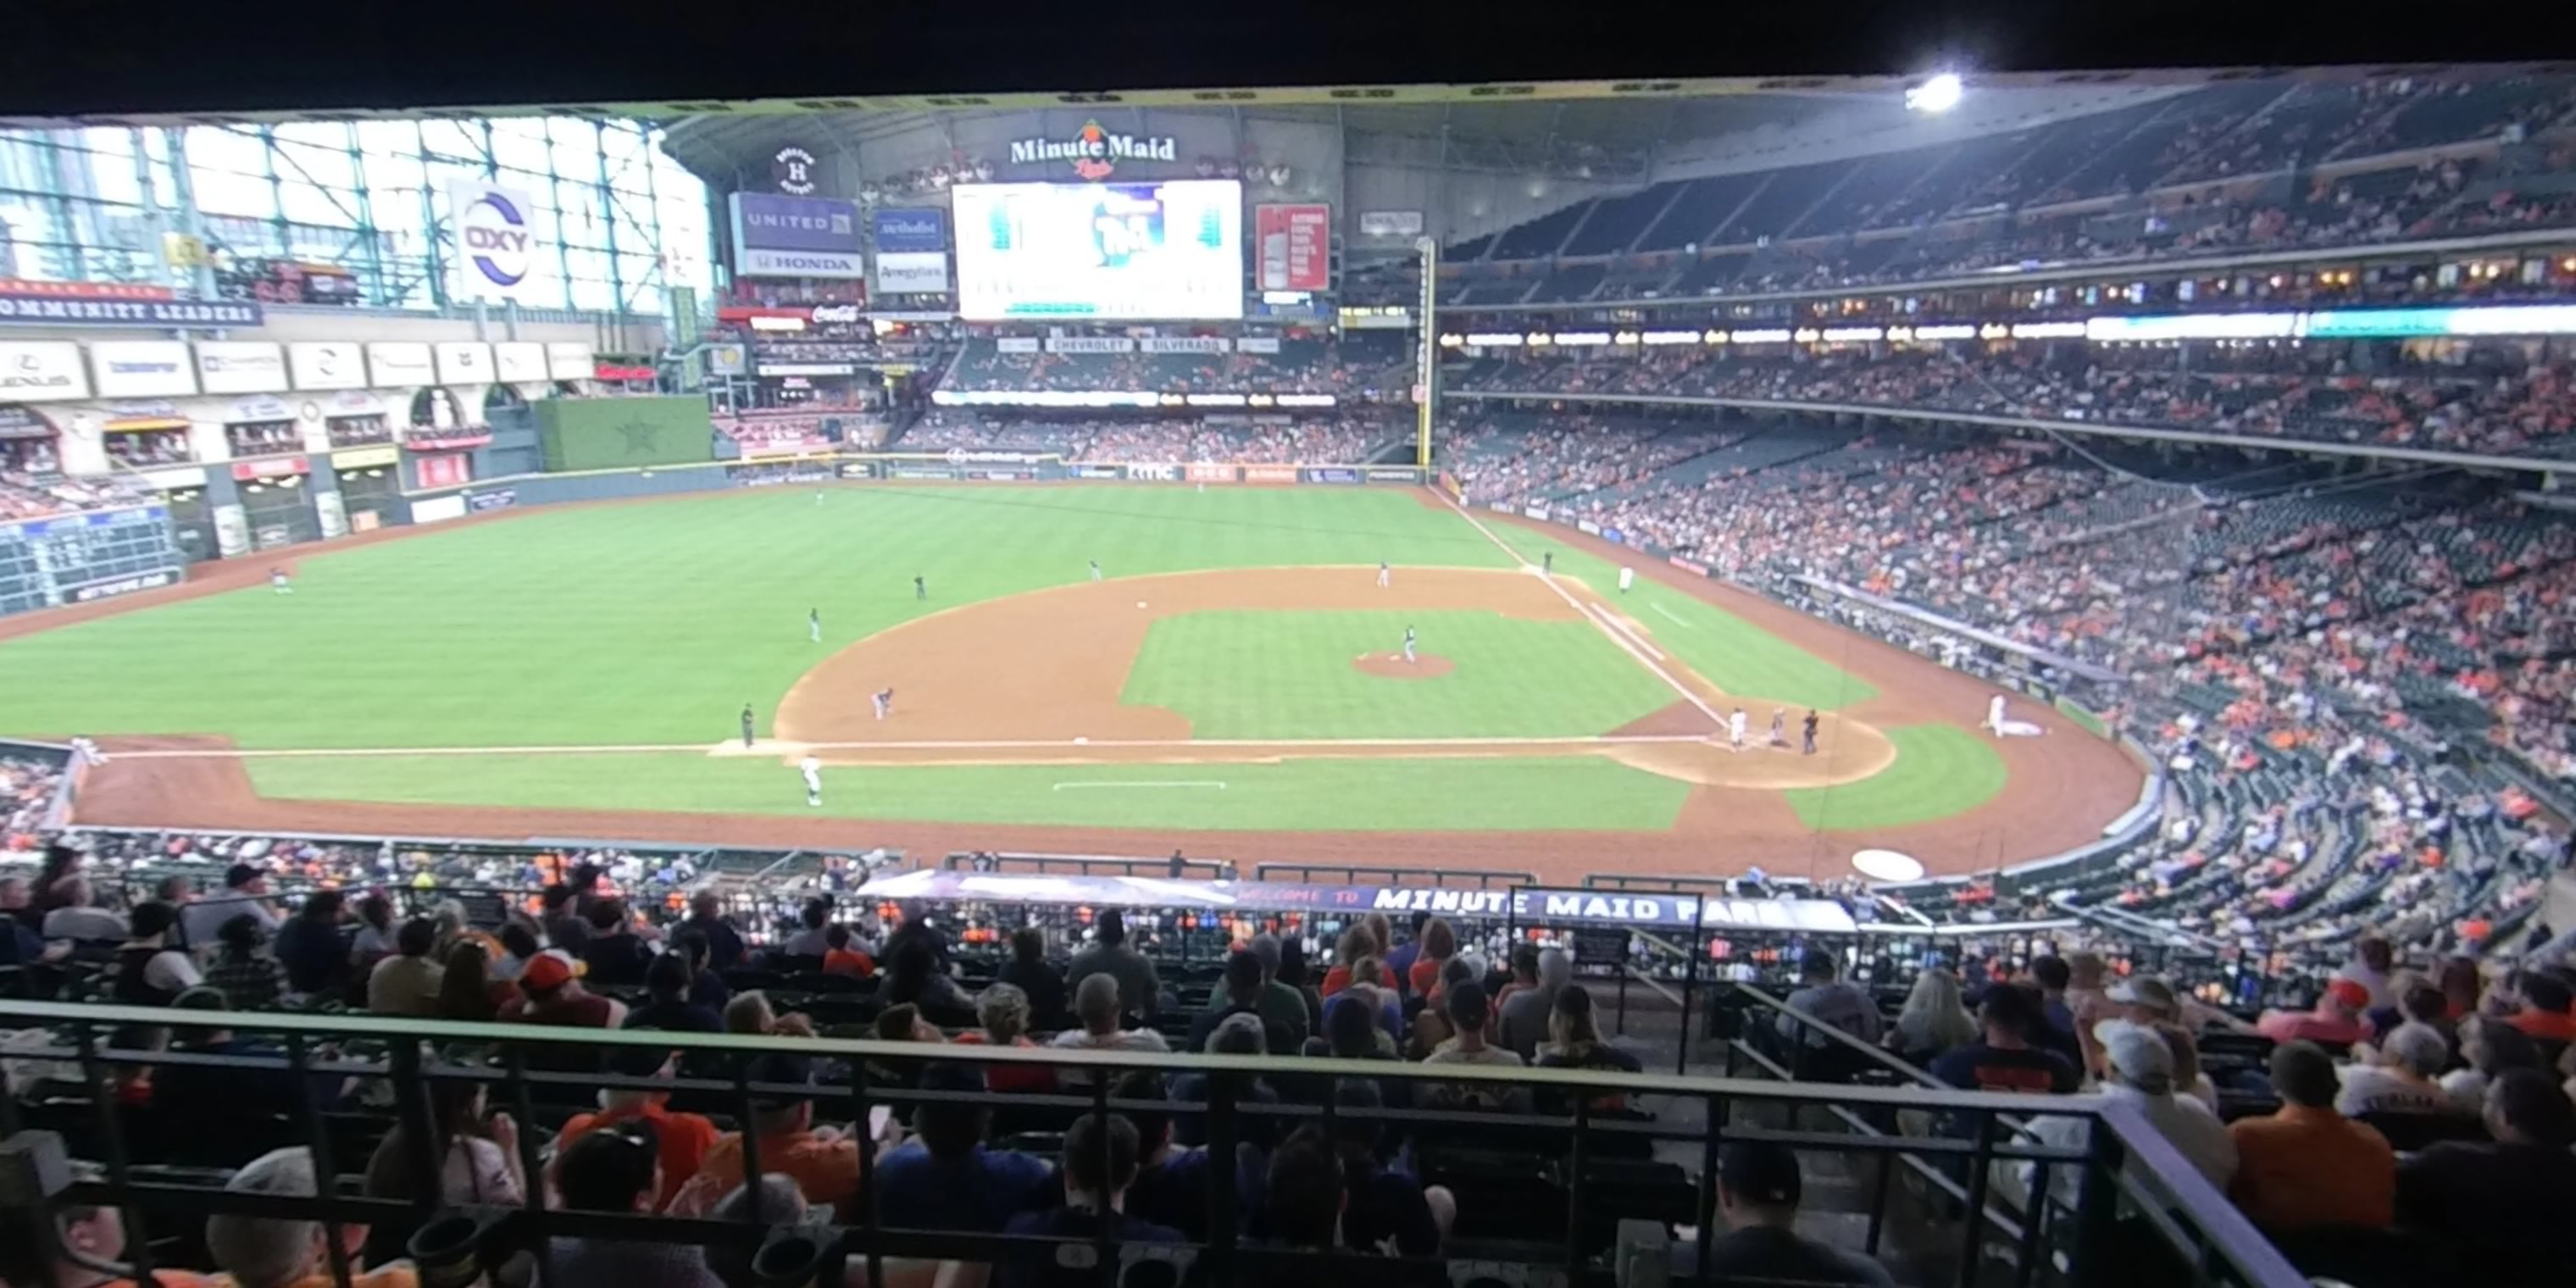 section 213 panoramic seat view  for baseball - minute maid park